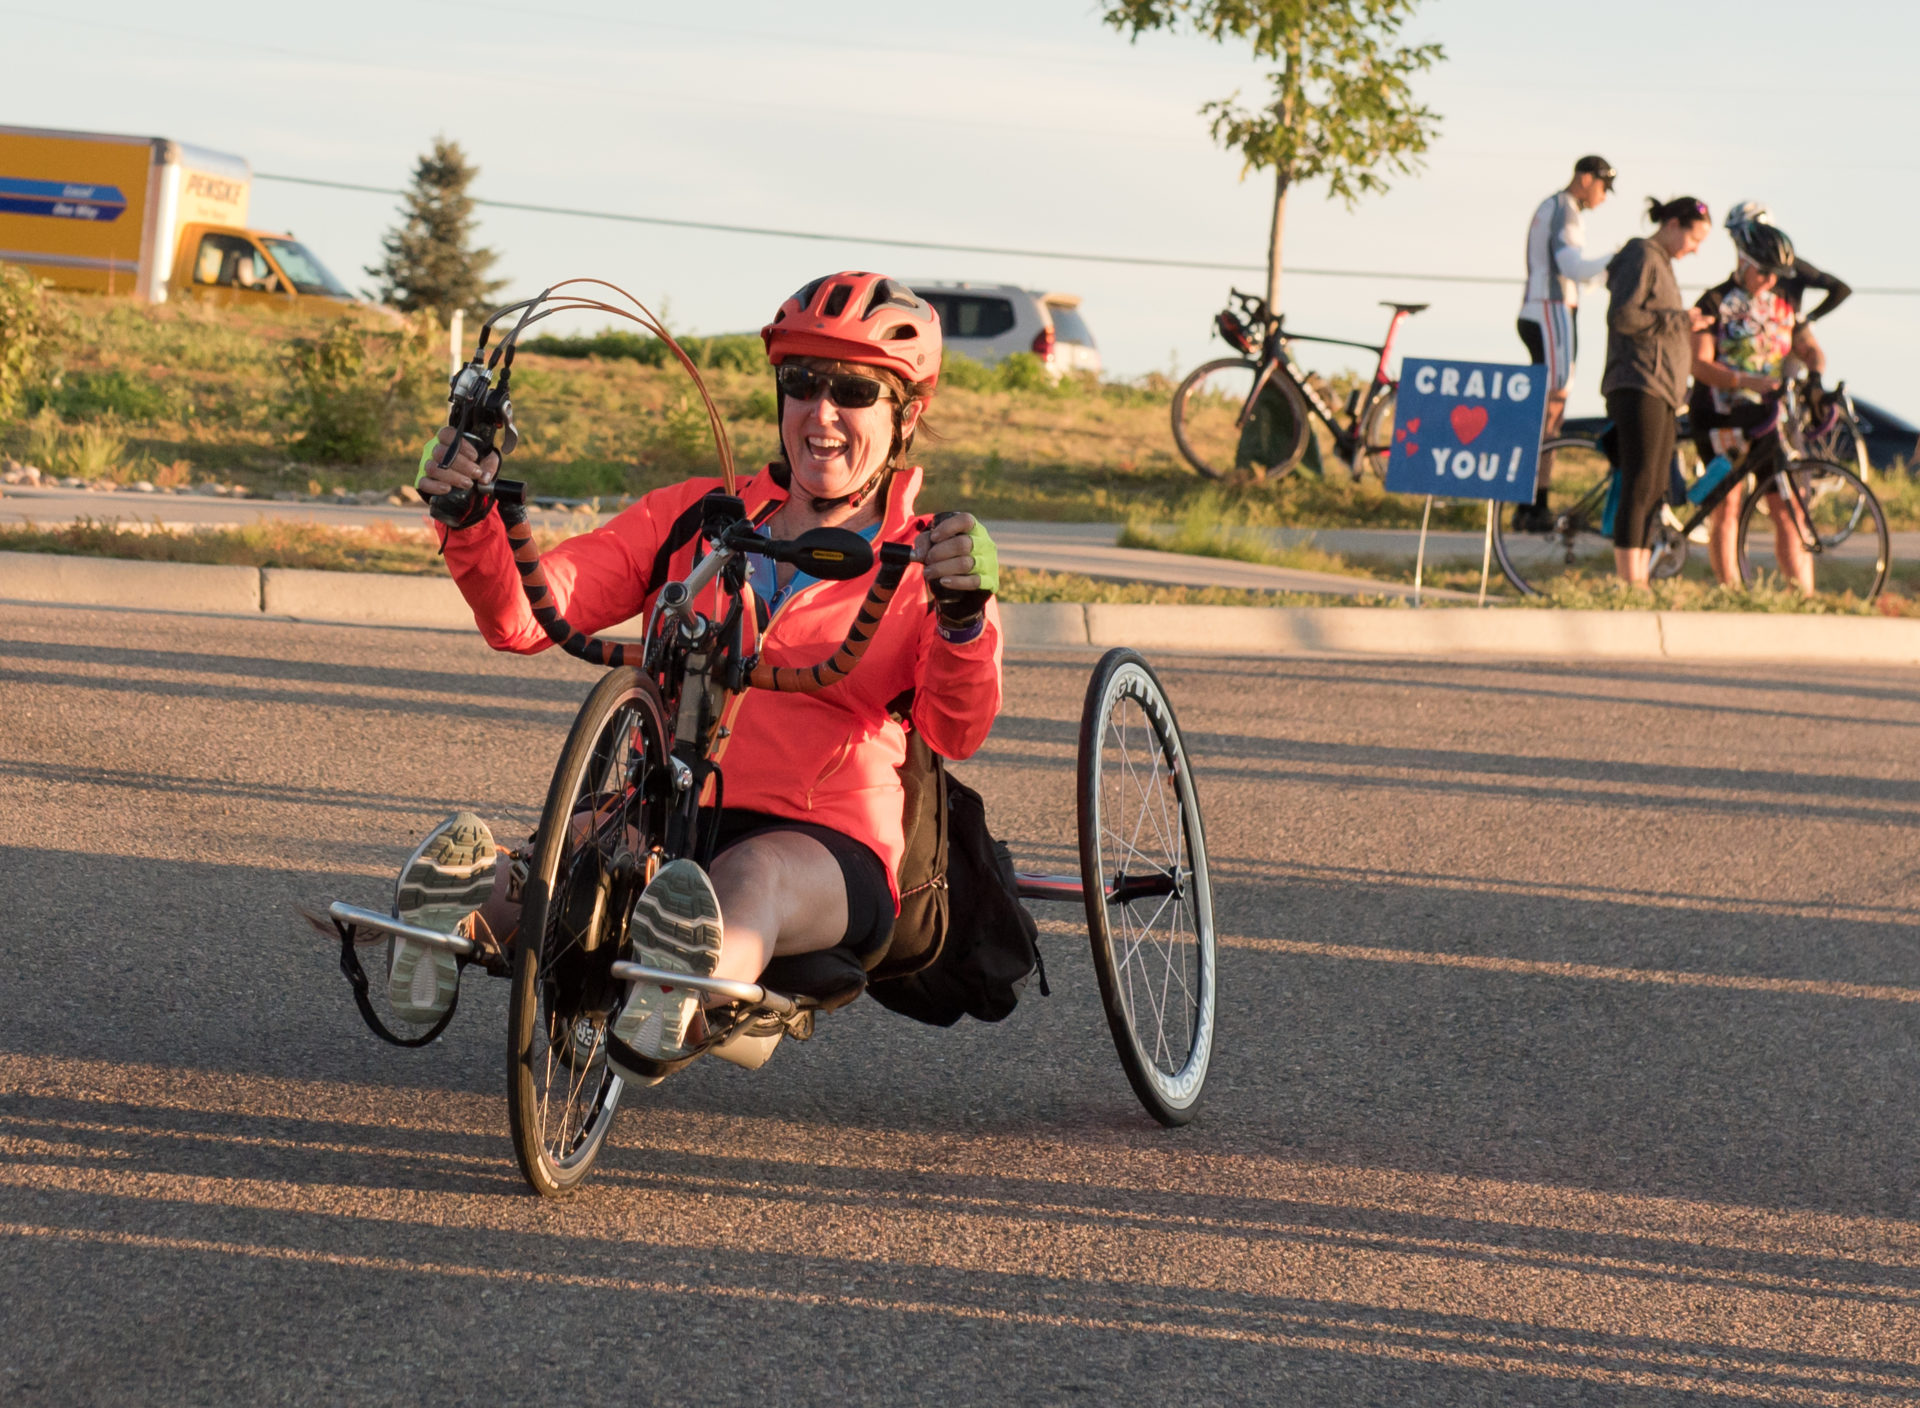 A person riding a recumbent trike rides on a paved road.